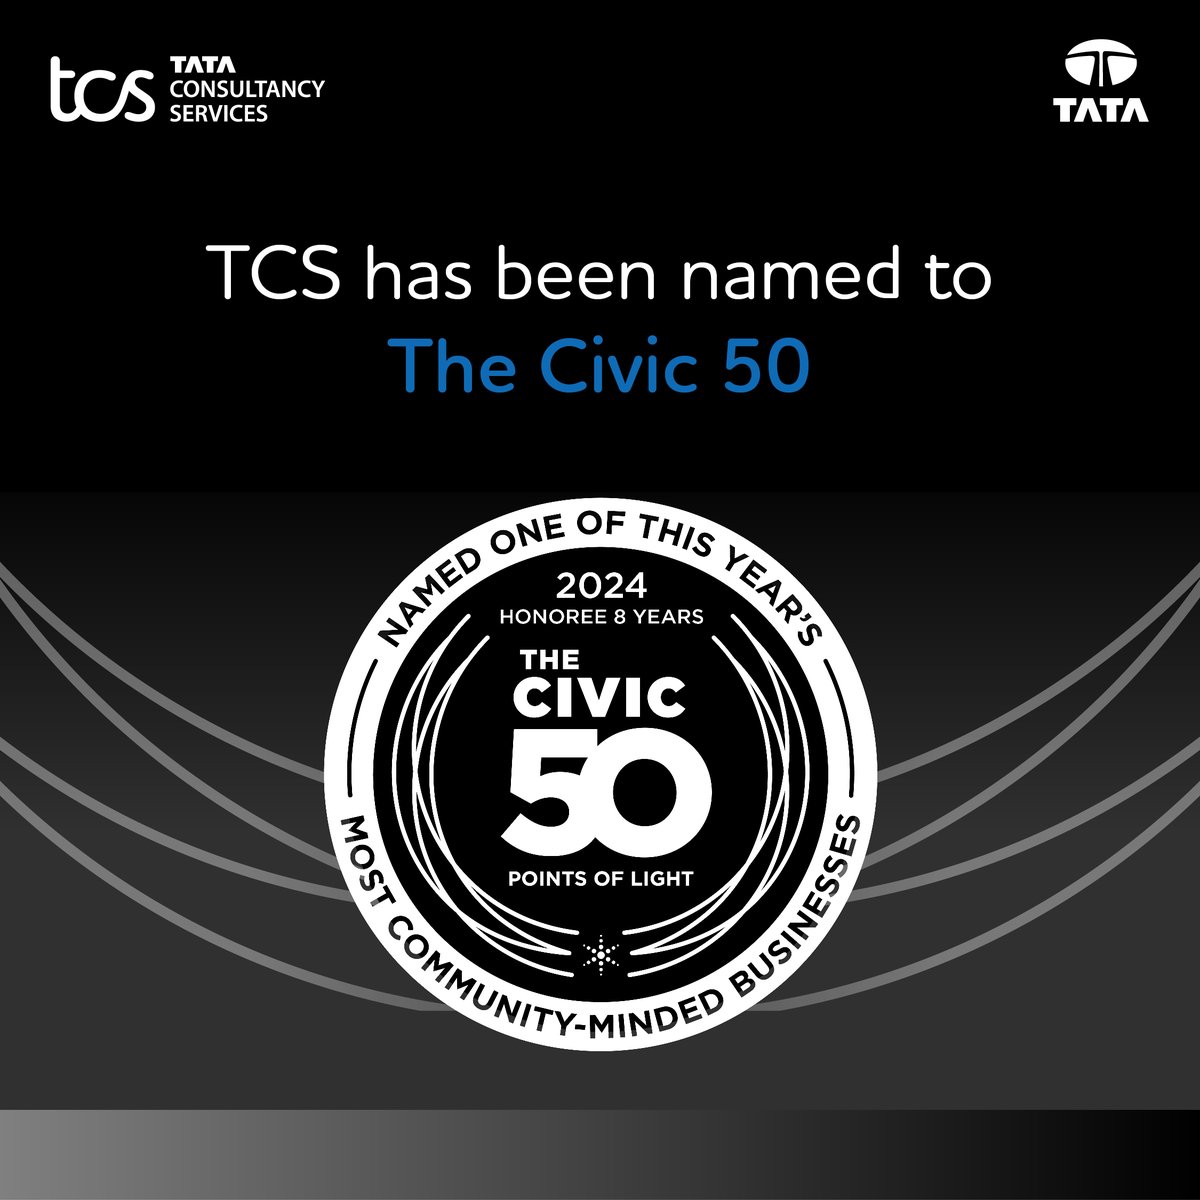 We are thrilled to be recognized by @PointsofLight with inclusion on #TheCivic50 list for the 8th year in a row. POL named us as one of the most community-minded companies in the U.S. and recognized us as #IT sector lead for the 6th time. Our commitment to purpose-led business